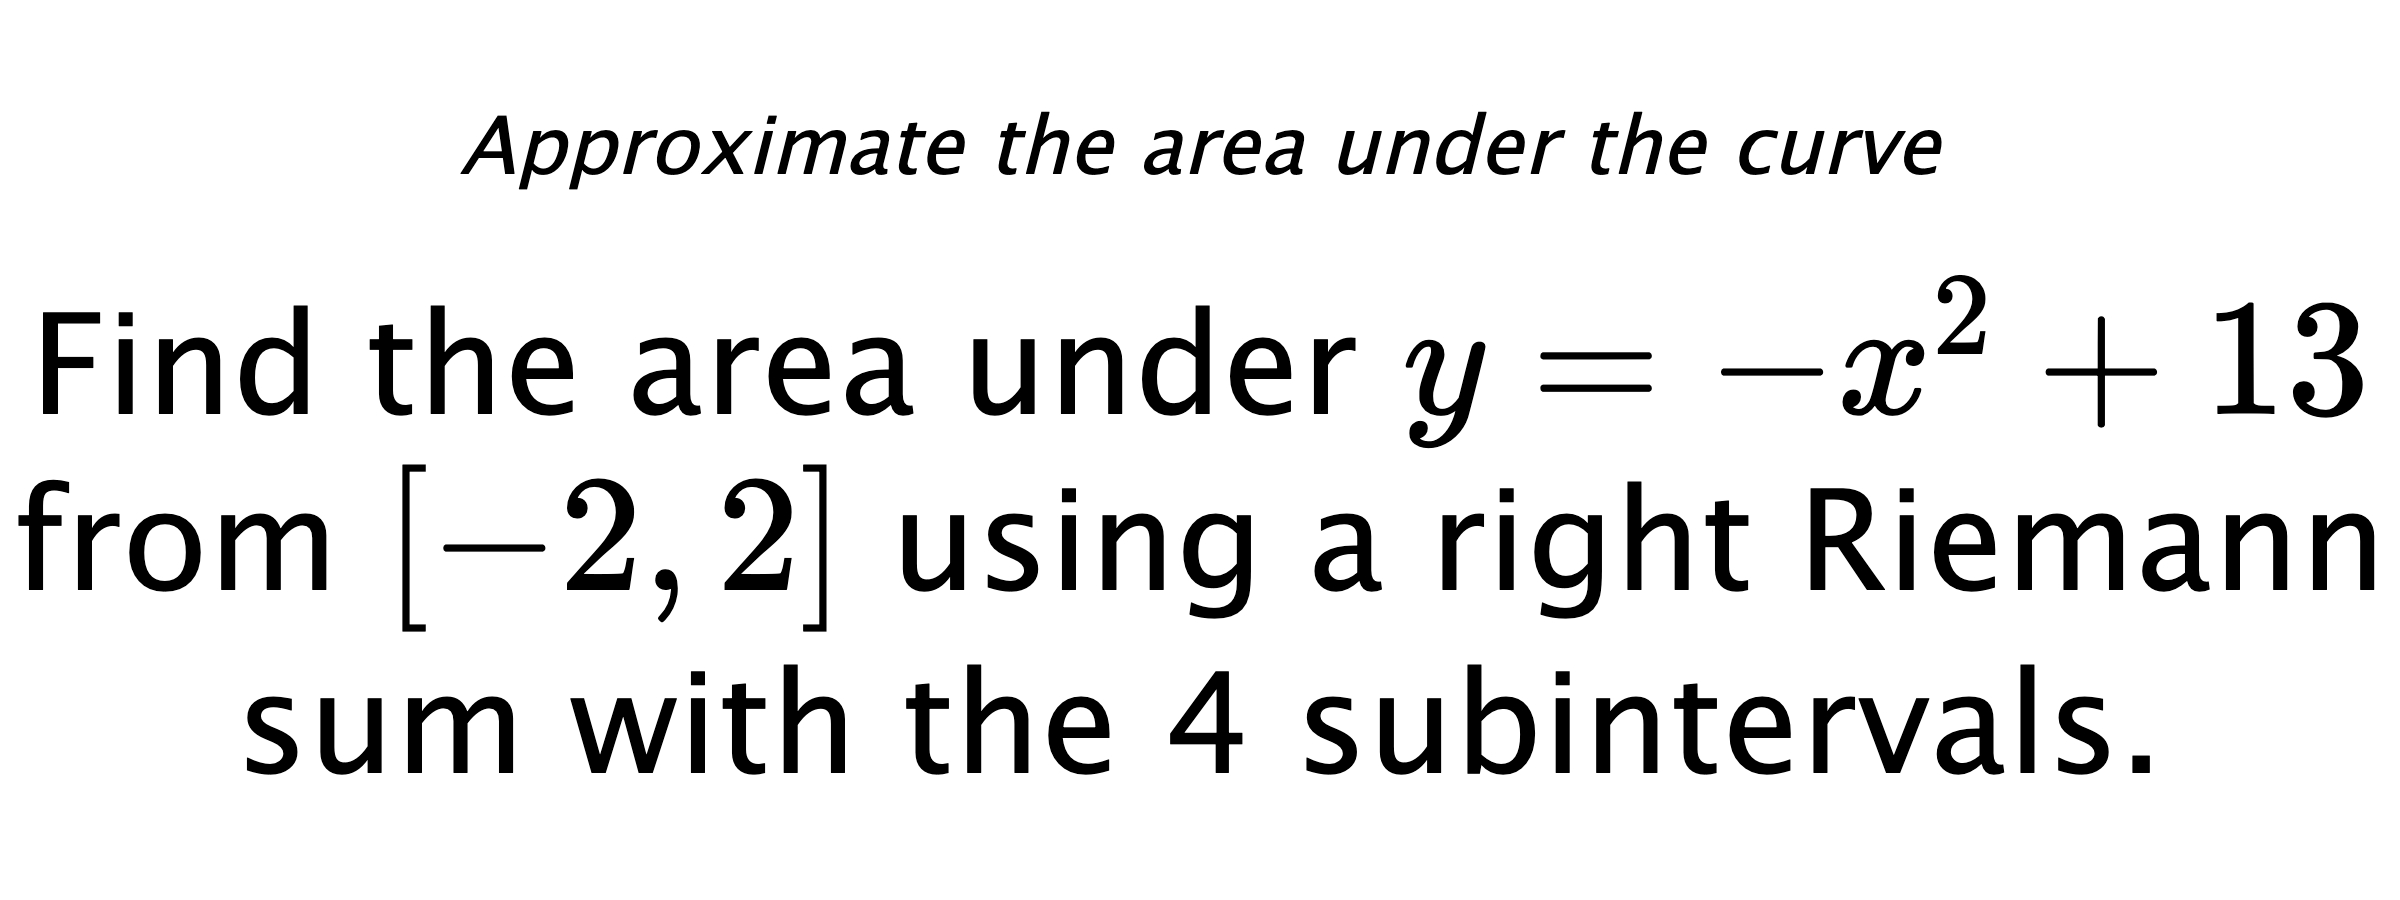 Approximate the area under the curve Find the area under $ y=-x^2+13 $ from $ [-2,2] $ using a right Riemann sum with the 4 subintervals.